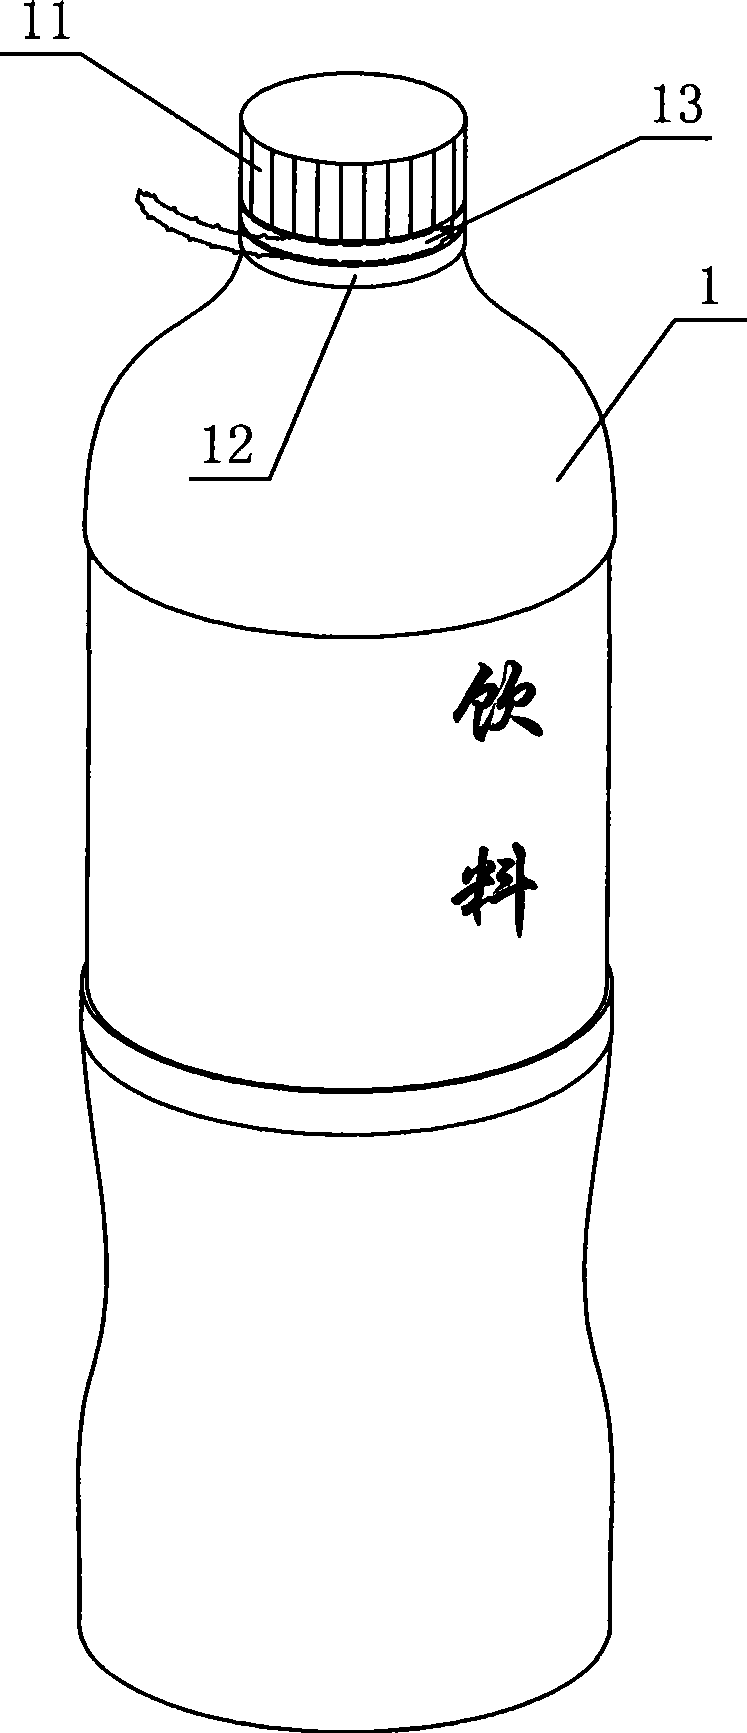 Anti-confusing recognization method of portable beverage container confusing